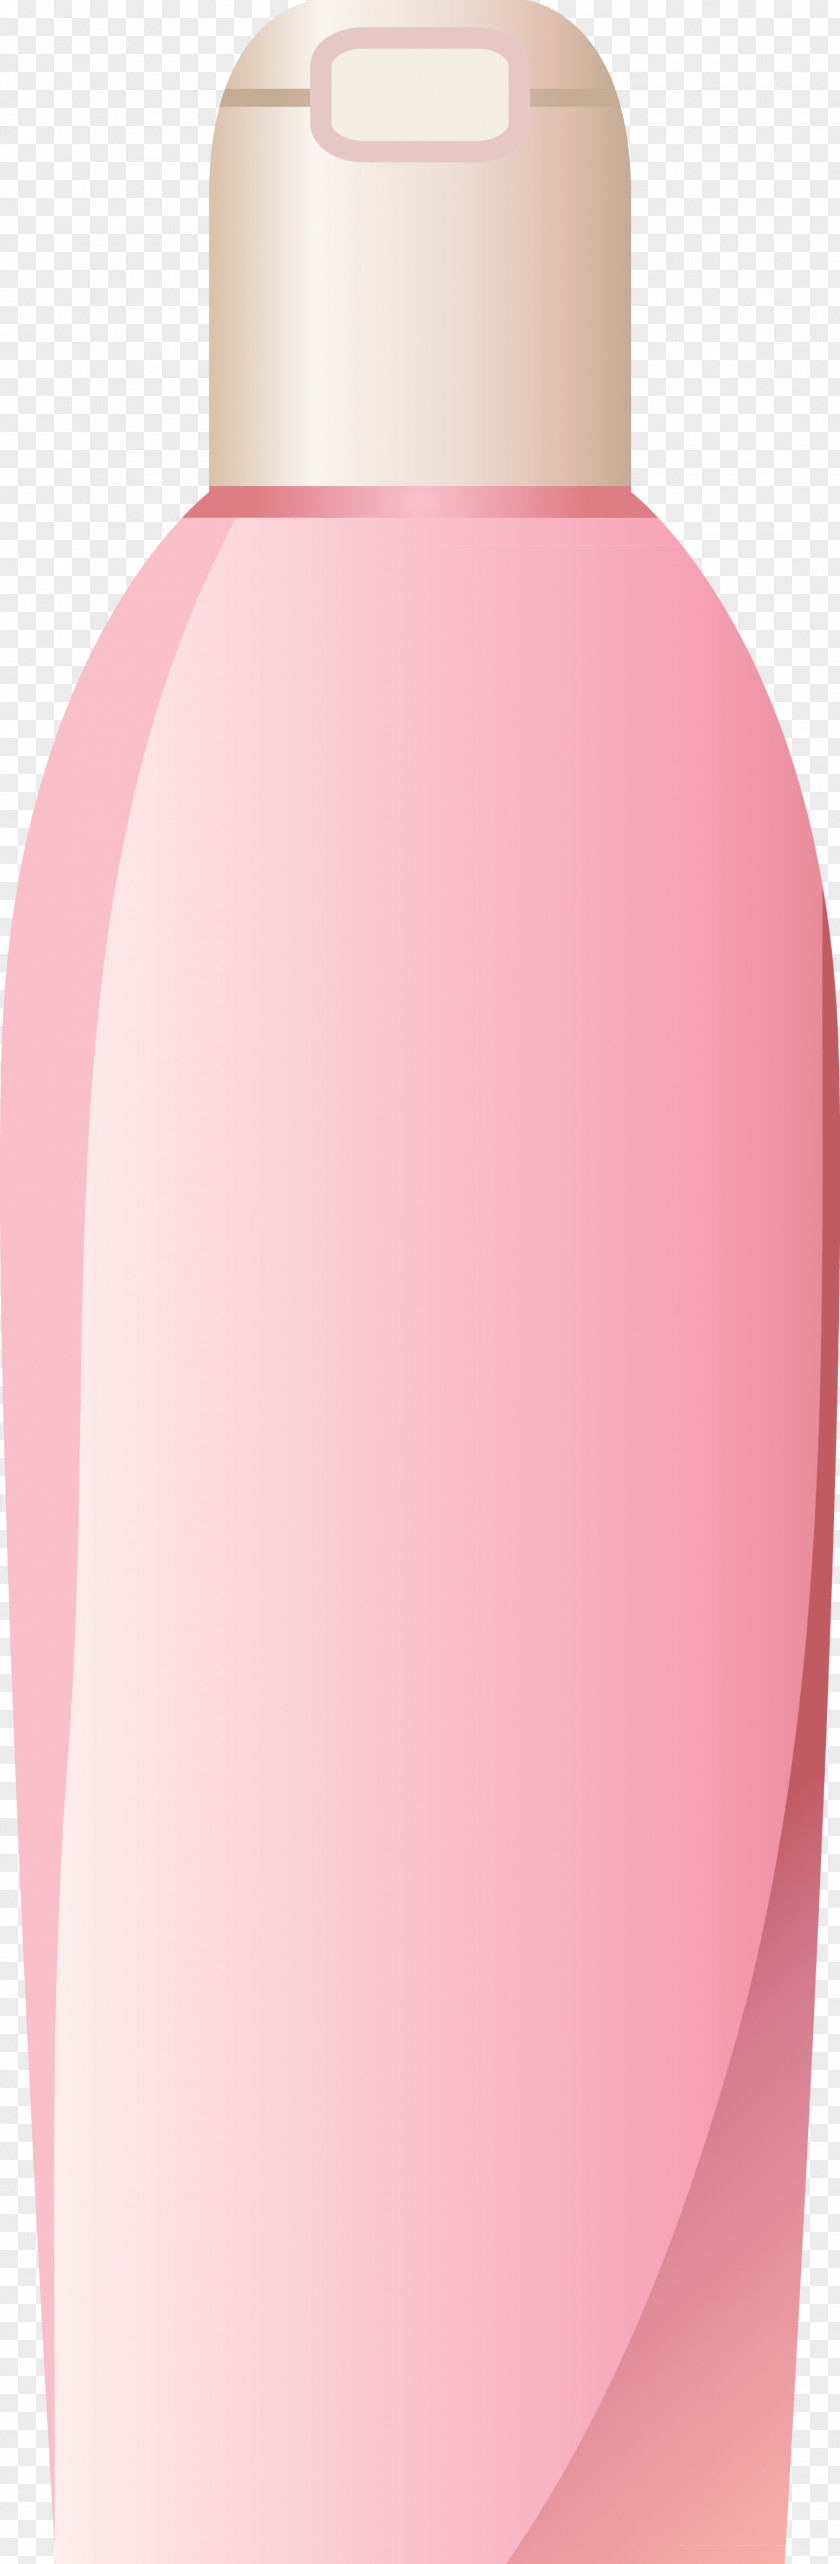 COSMETICS Oil Cleanser PNG